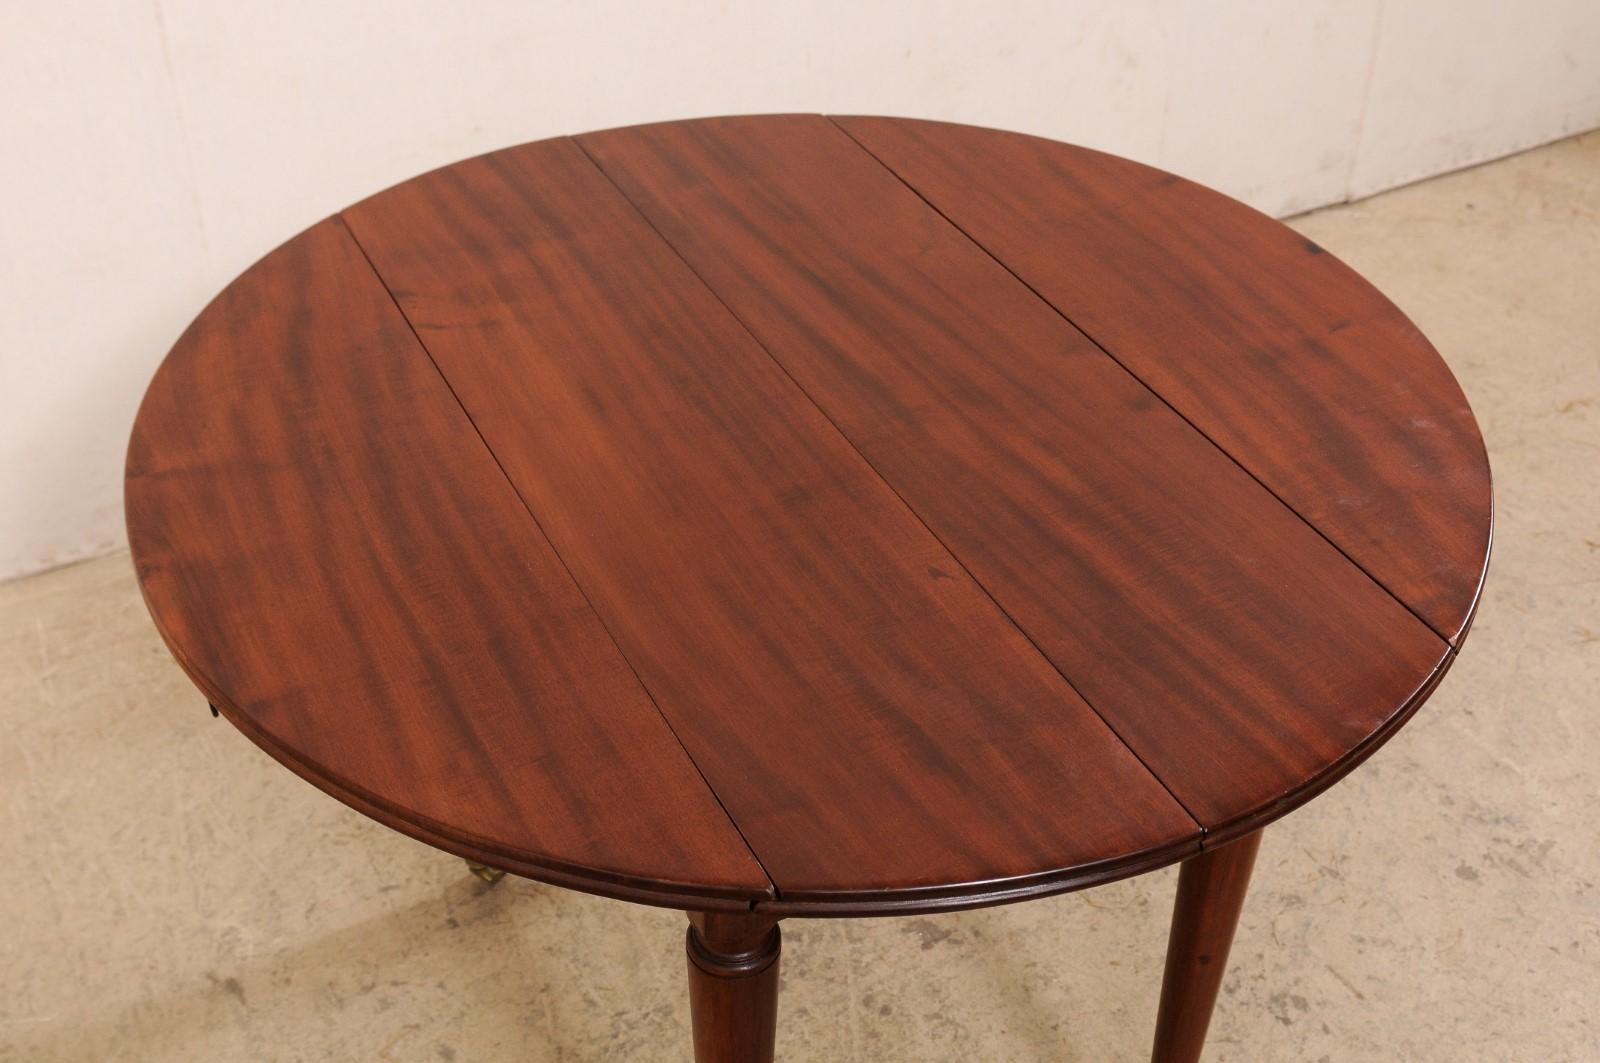 French 19th C. Mahogany Round Table W/Drop Leaves & Petite Brass Caster Feet For Sale 2